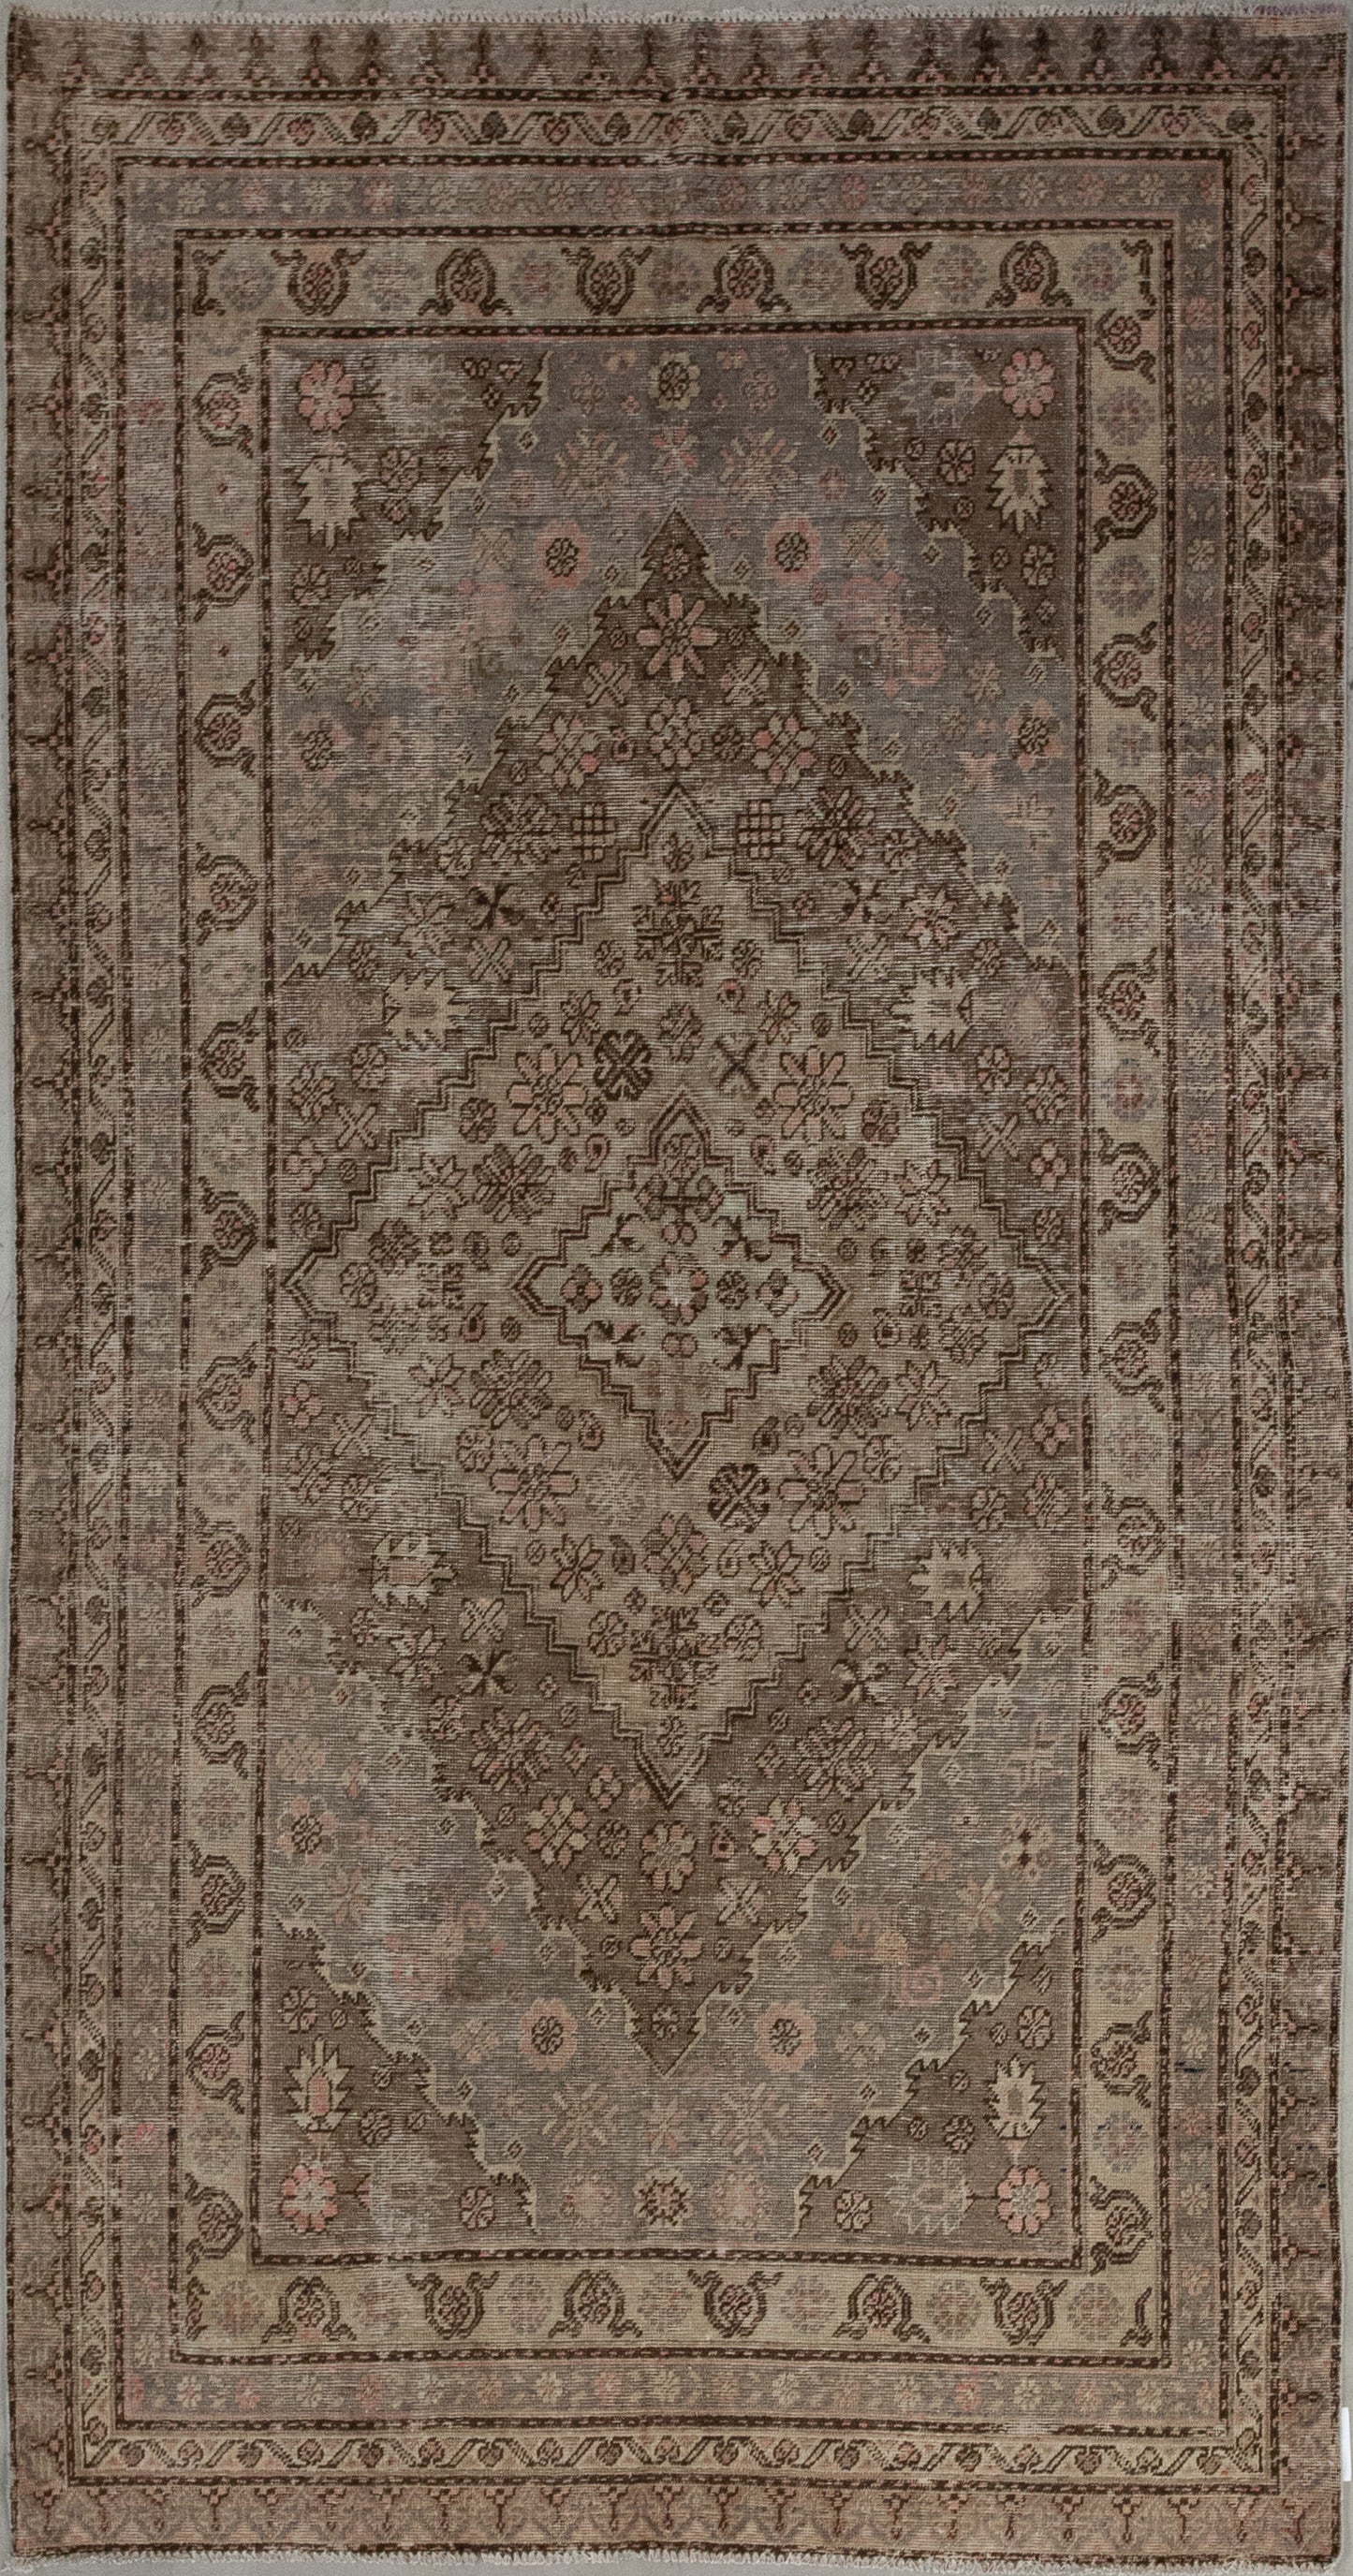 This astonishing carpet was woven with a pleasant color combination which is within variations of brown and pinkish accents. It will bring homeliness, and concentration vibes to your room. 